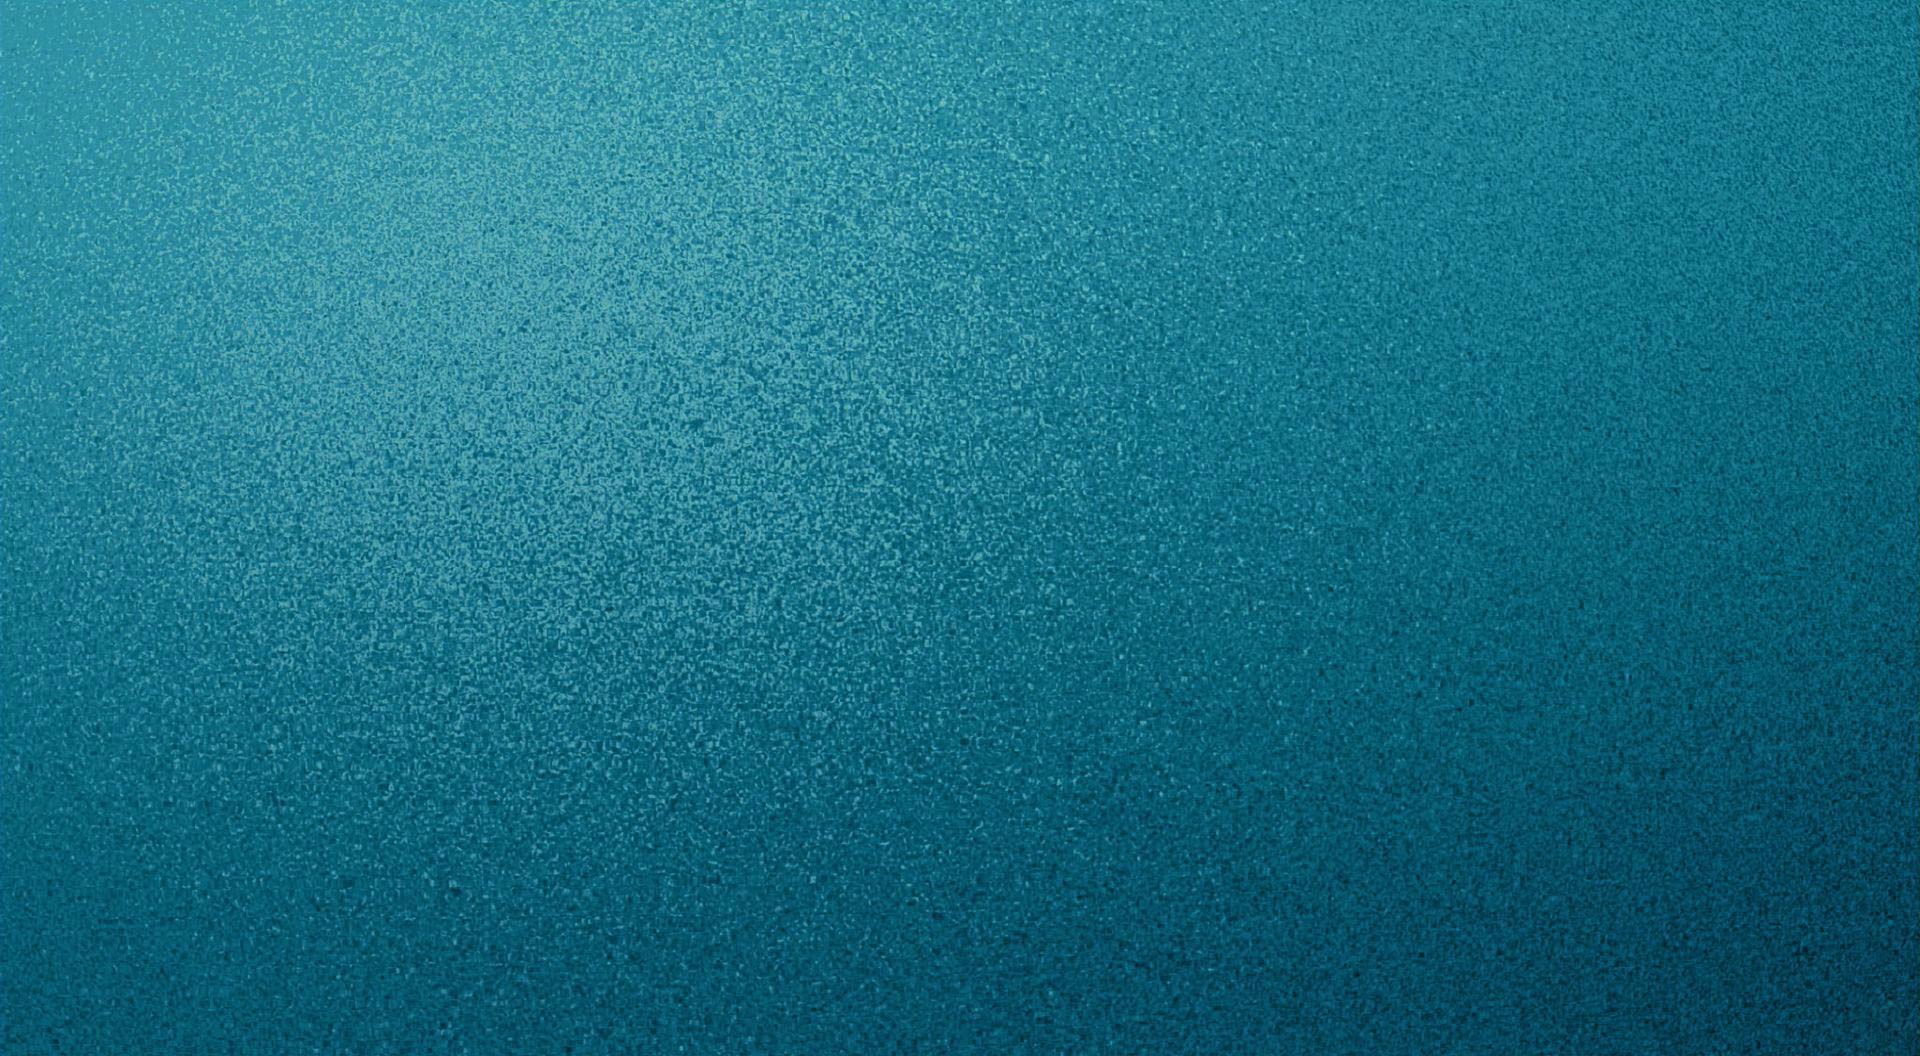 Hd texture backgrounds